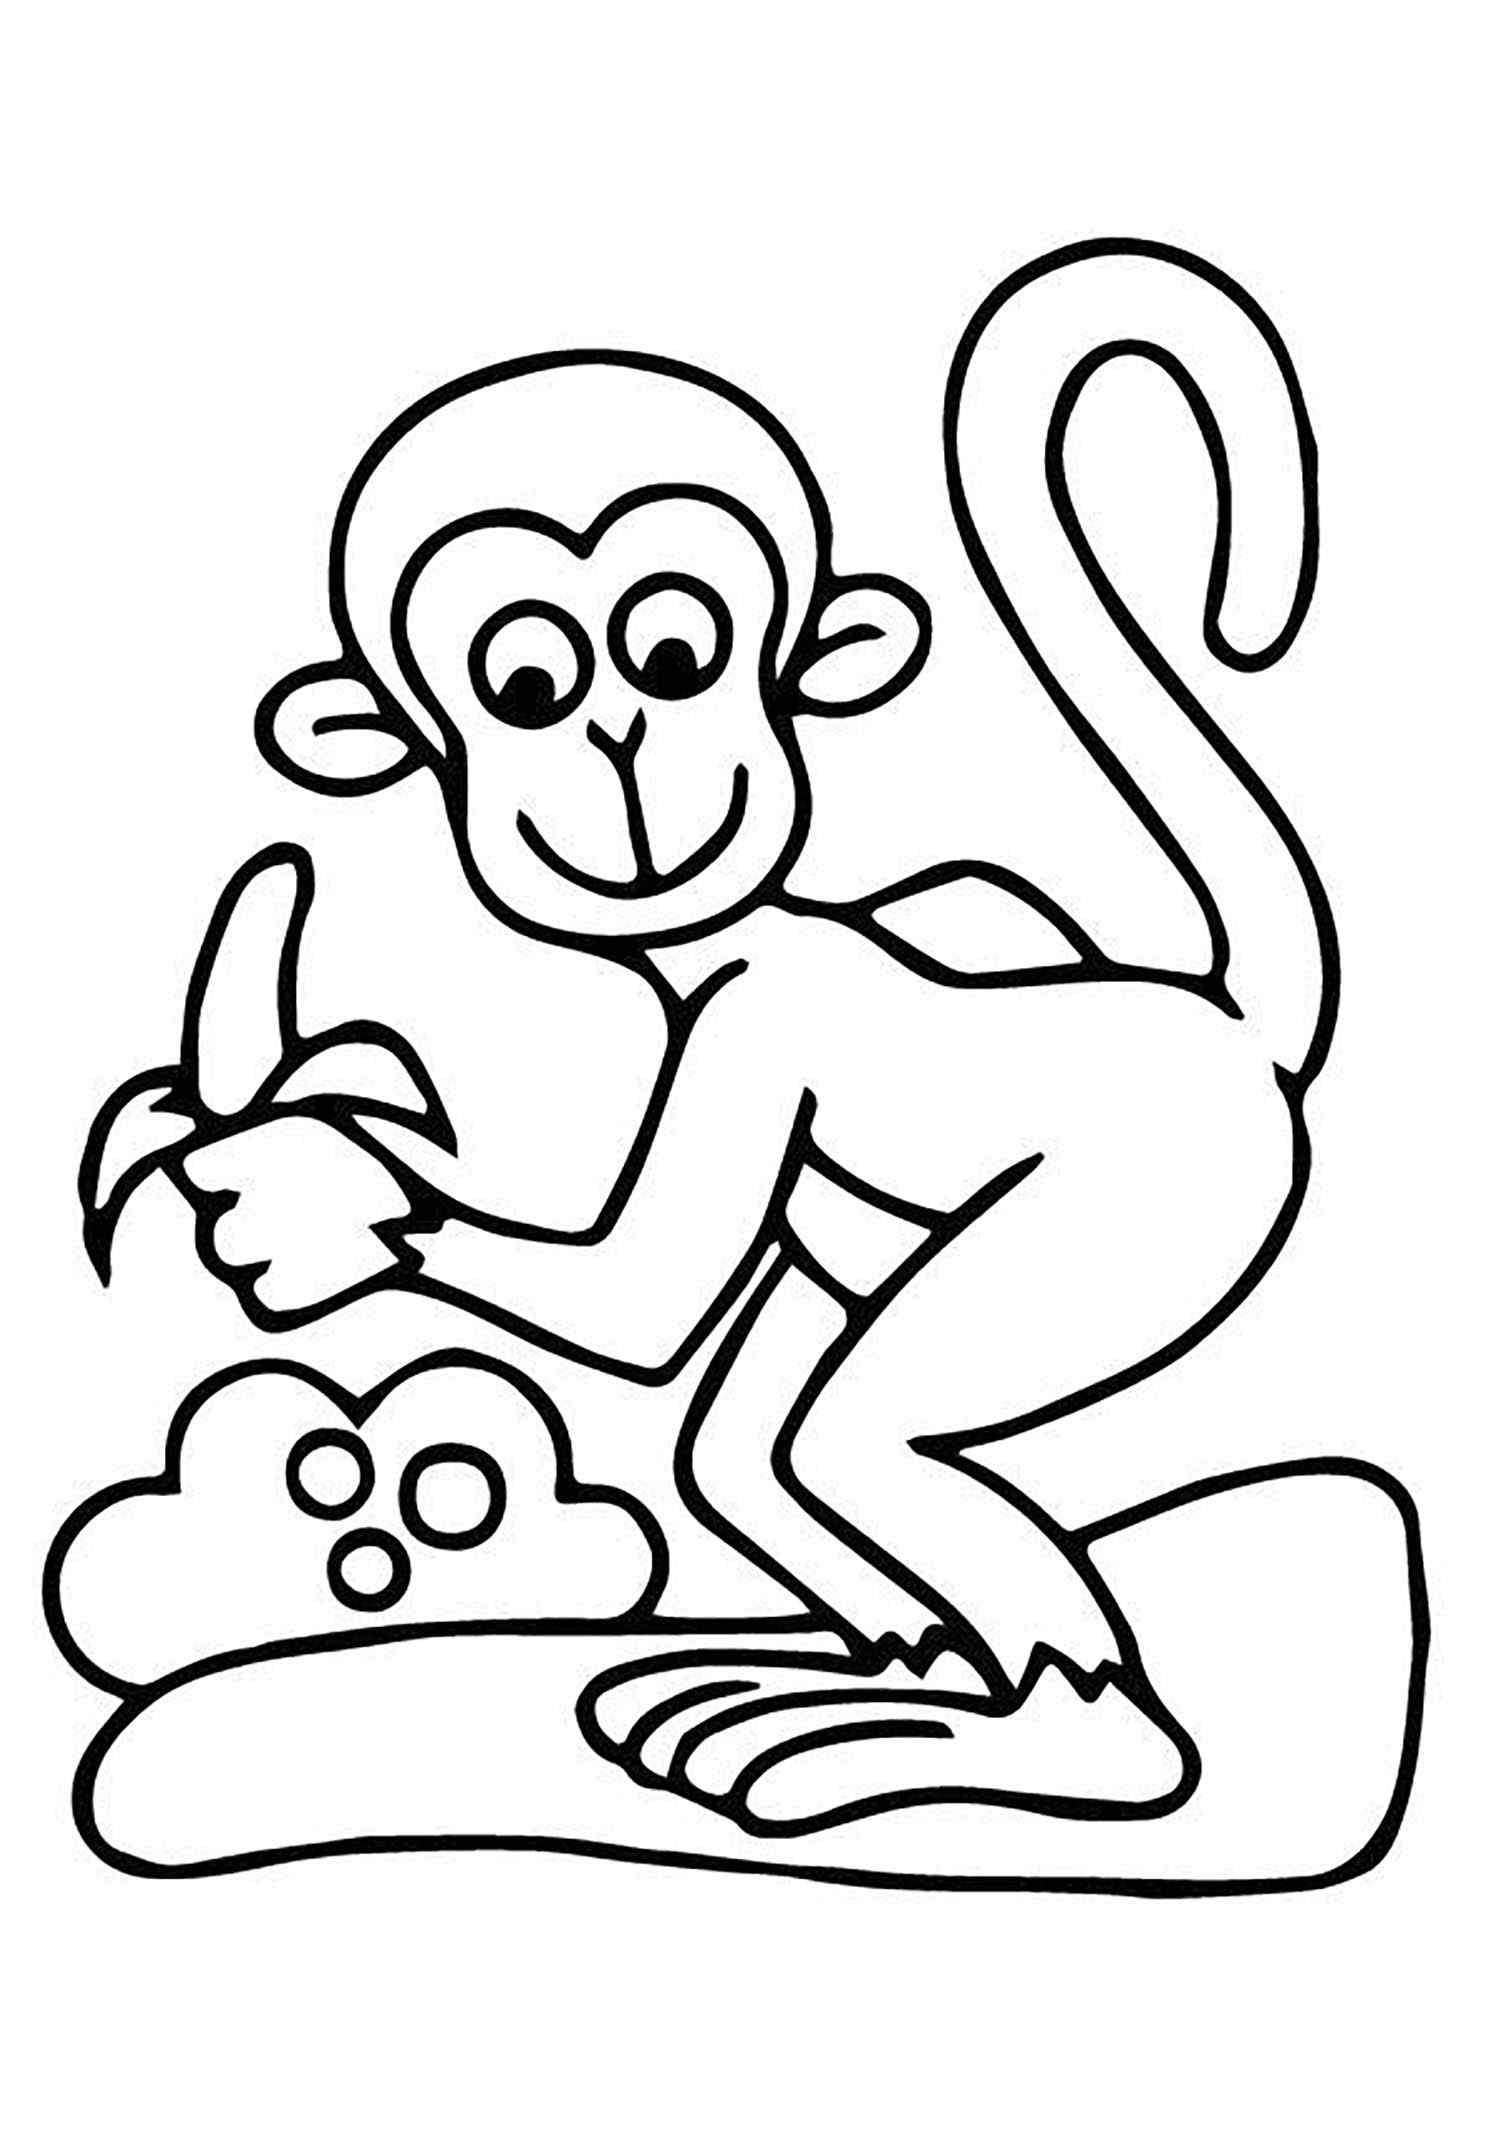 New Monkeys For Children Coloring Page